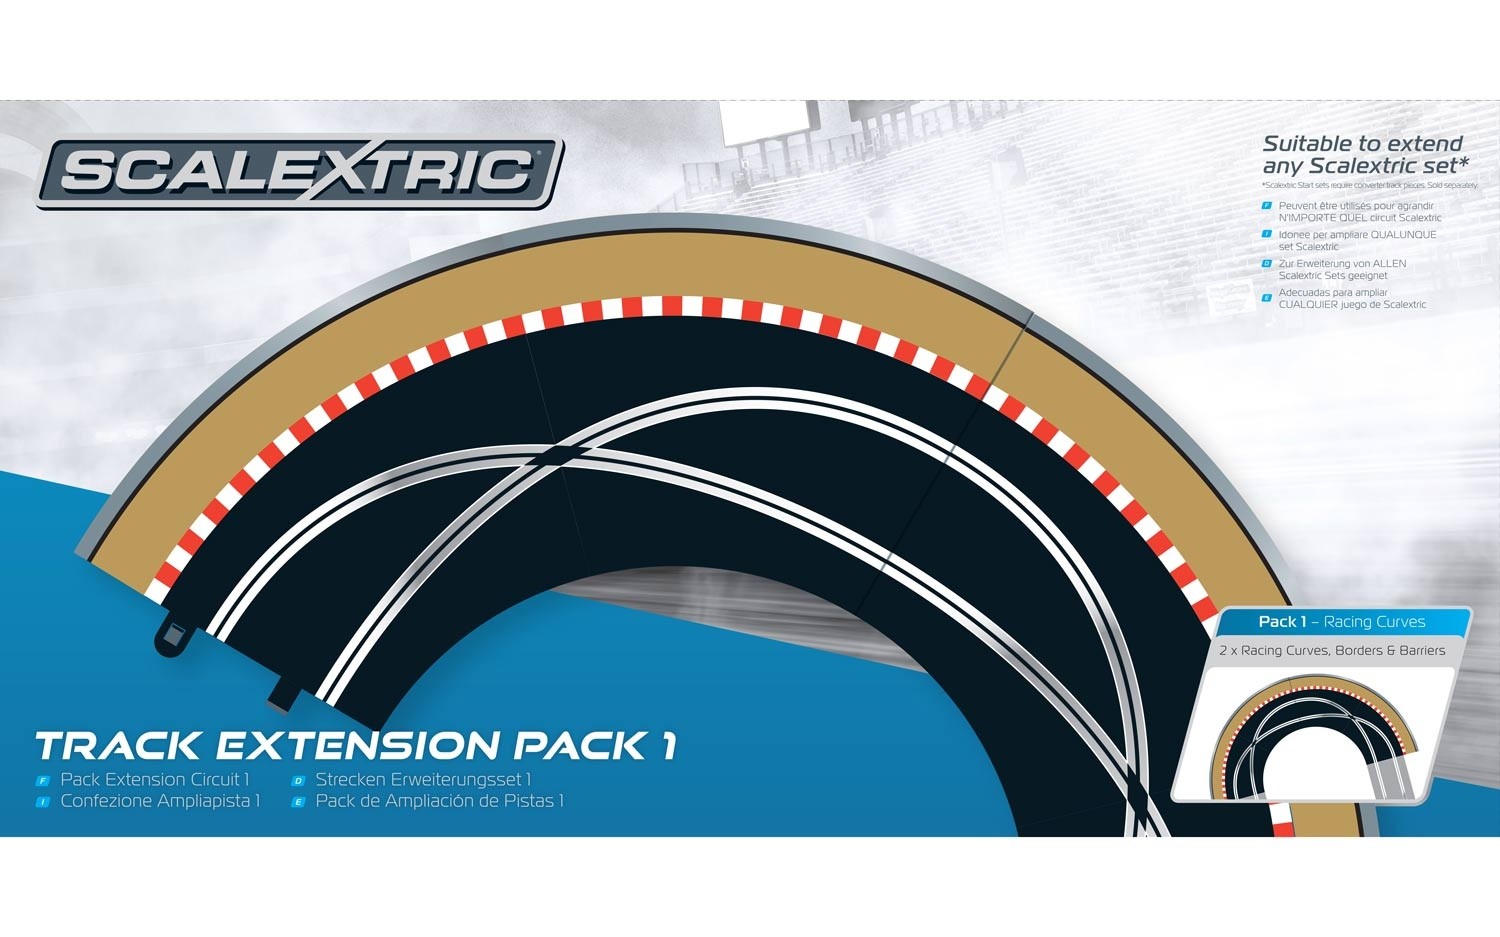 Track Extension Pack 1 